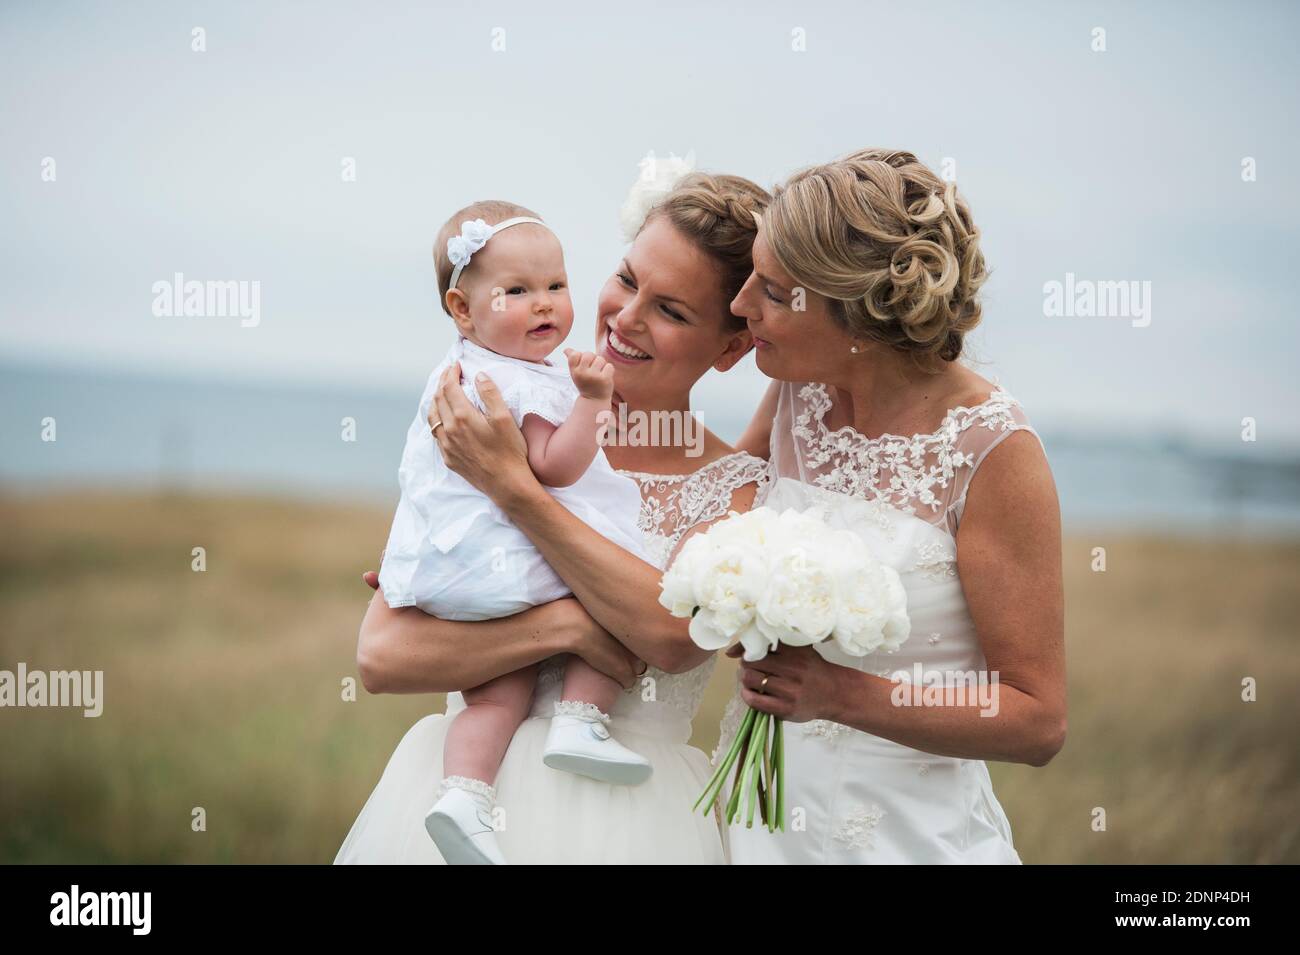 Brides with baby girl Stock Photo